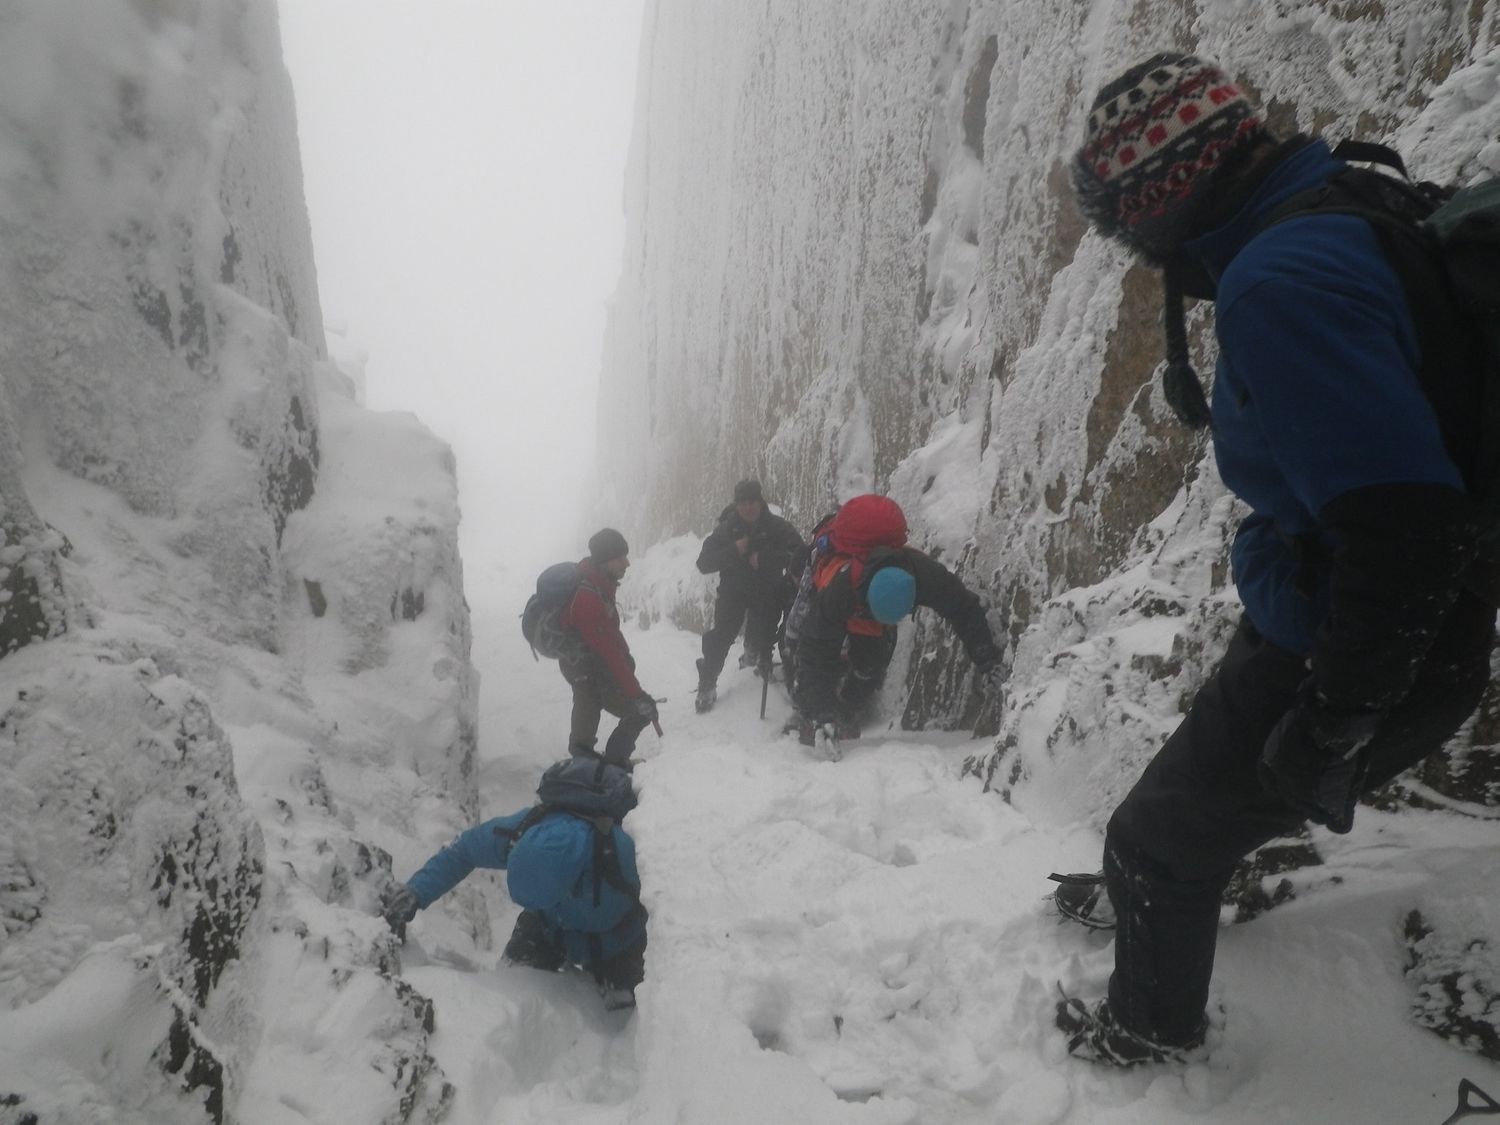  Scrambling in the Lake District mountains in winter - Chris Ensoll Mountain Guide 